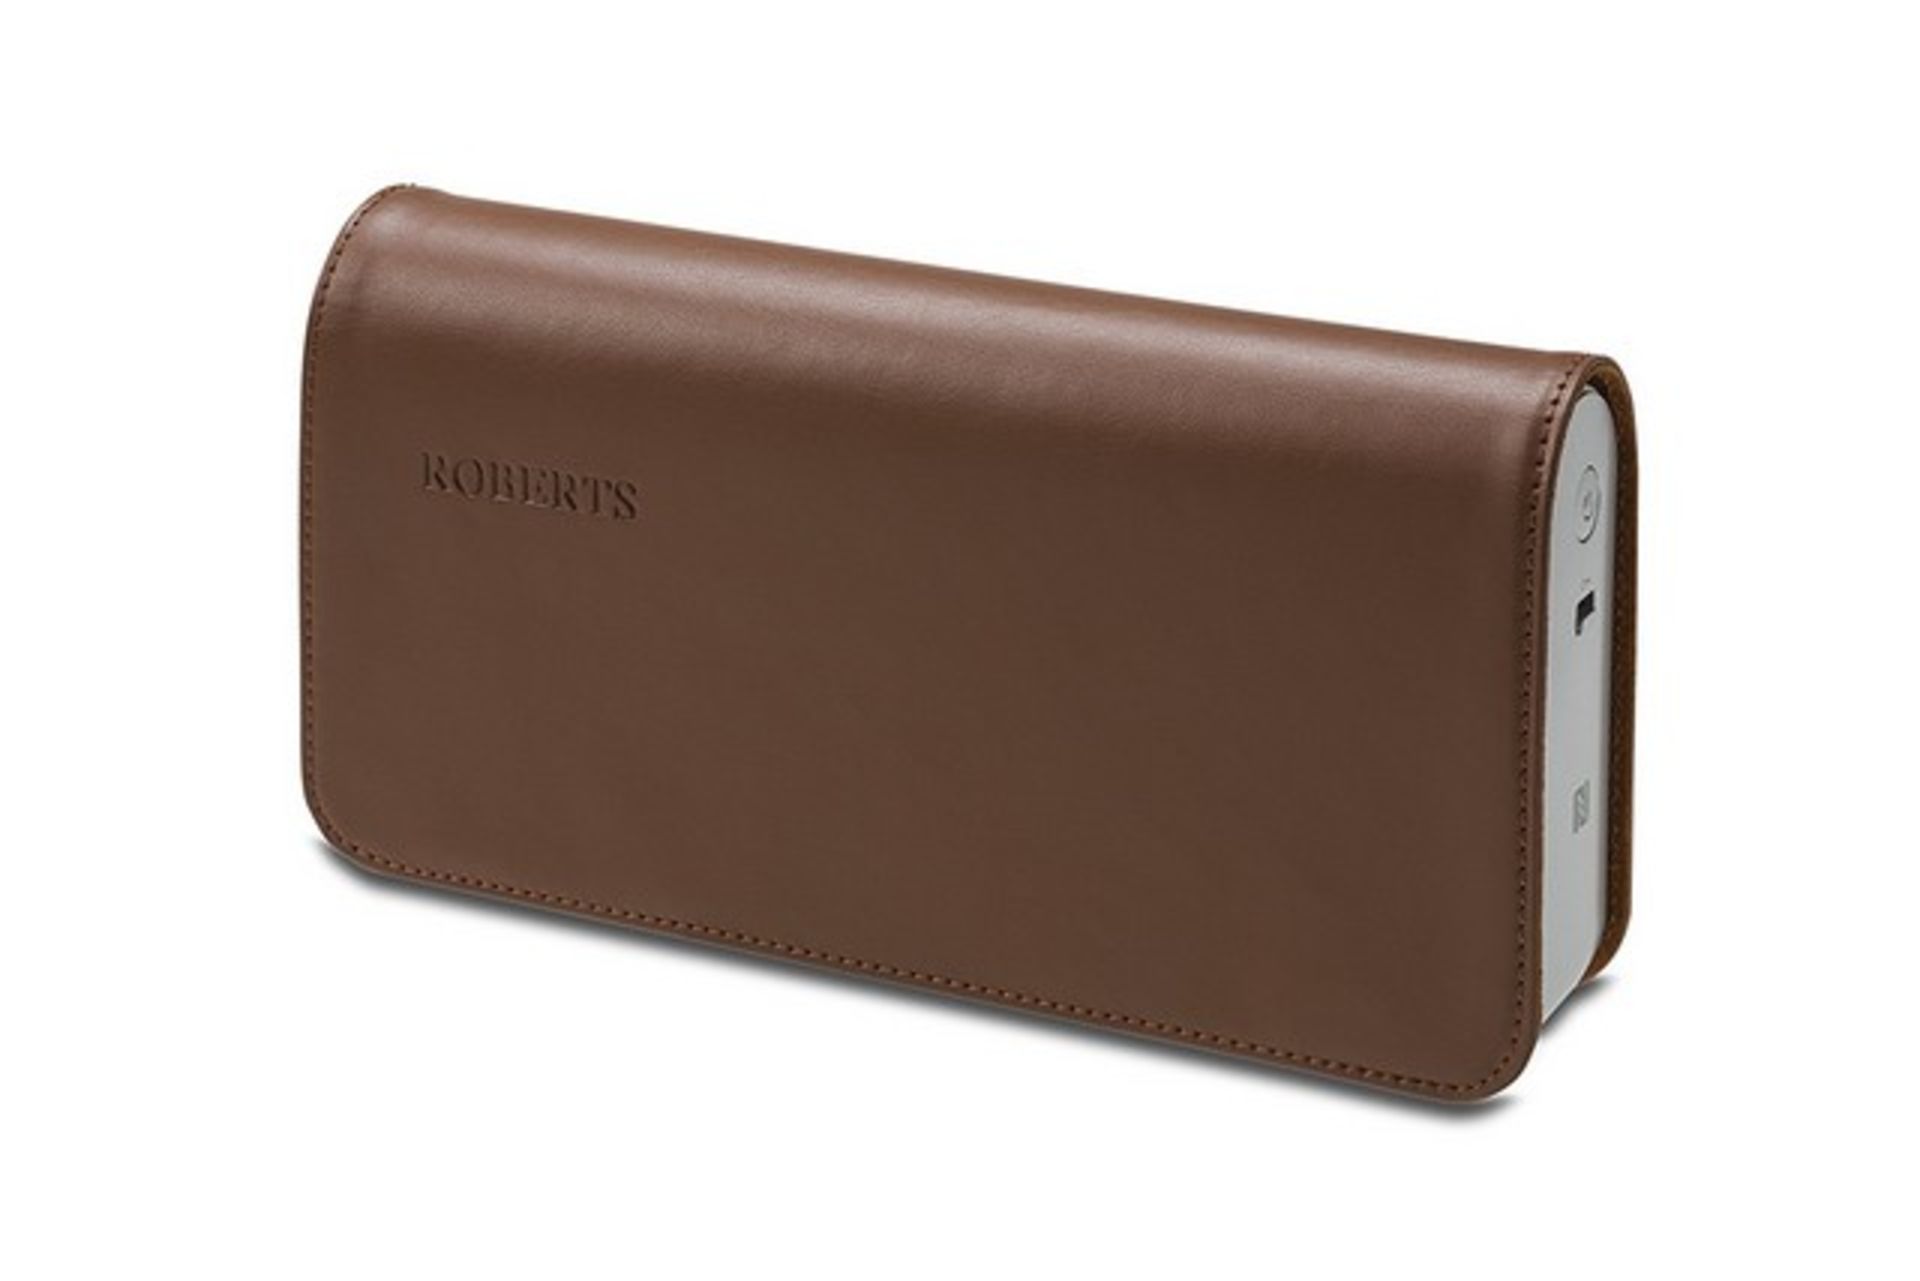 V Brand New Roberts BluPad Radio Portable Speaker With Built In Rechargable Battery And Leather - Image 2 of 4